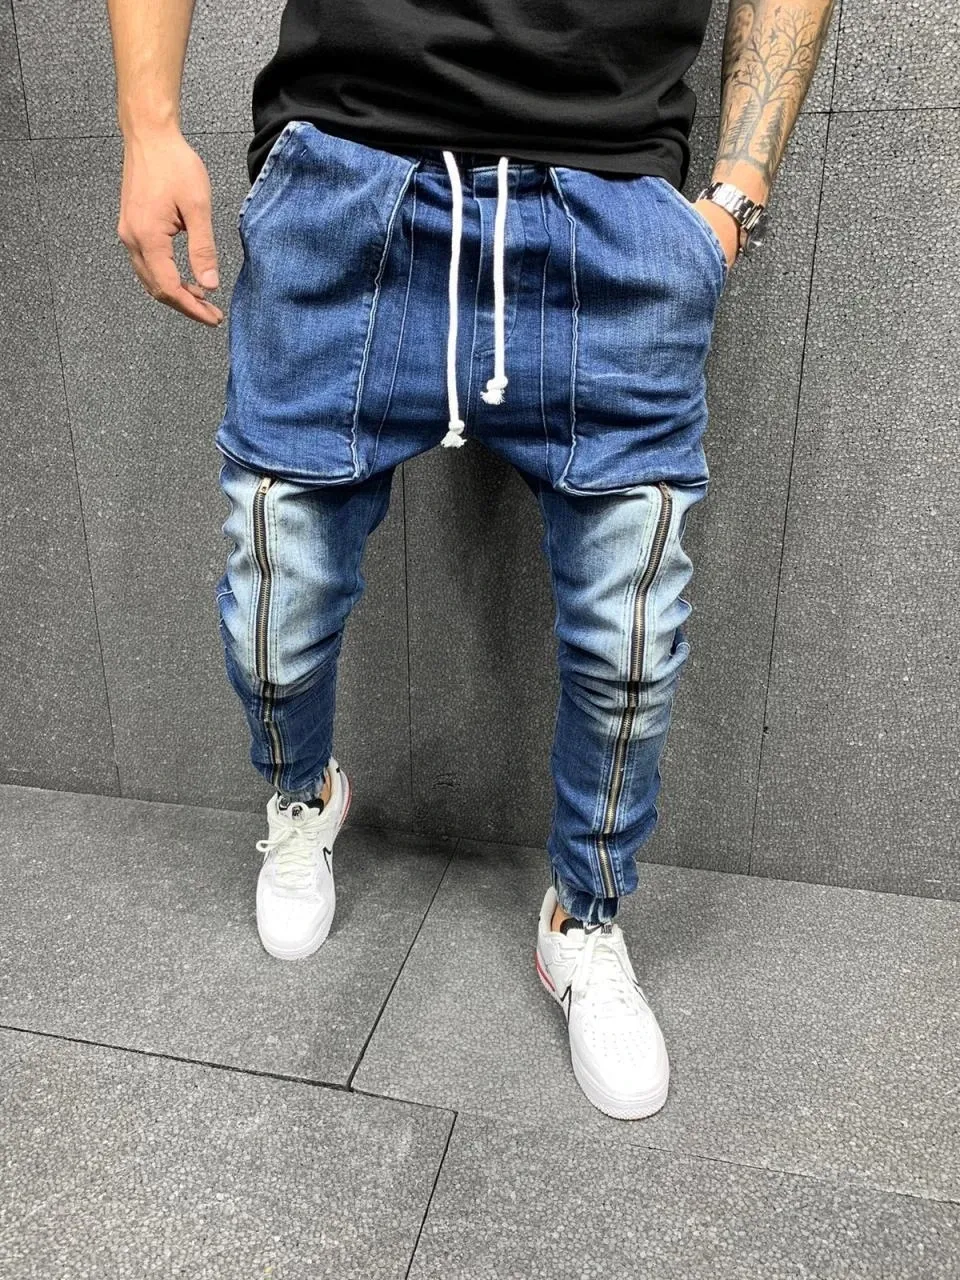 Mens High Street Distressed Denim Joggers With Zipper Pocket And Washed  Microtip Pencil Design From Cinda01, $24.3 | DHgate.Com